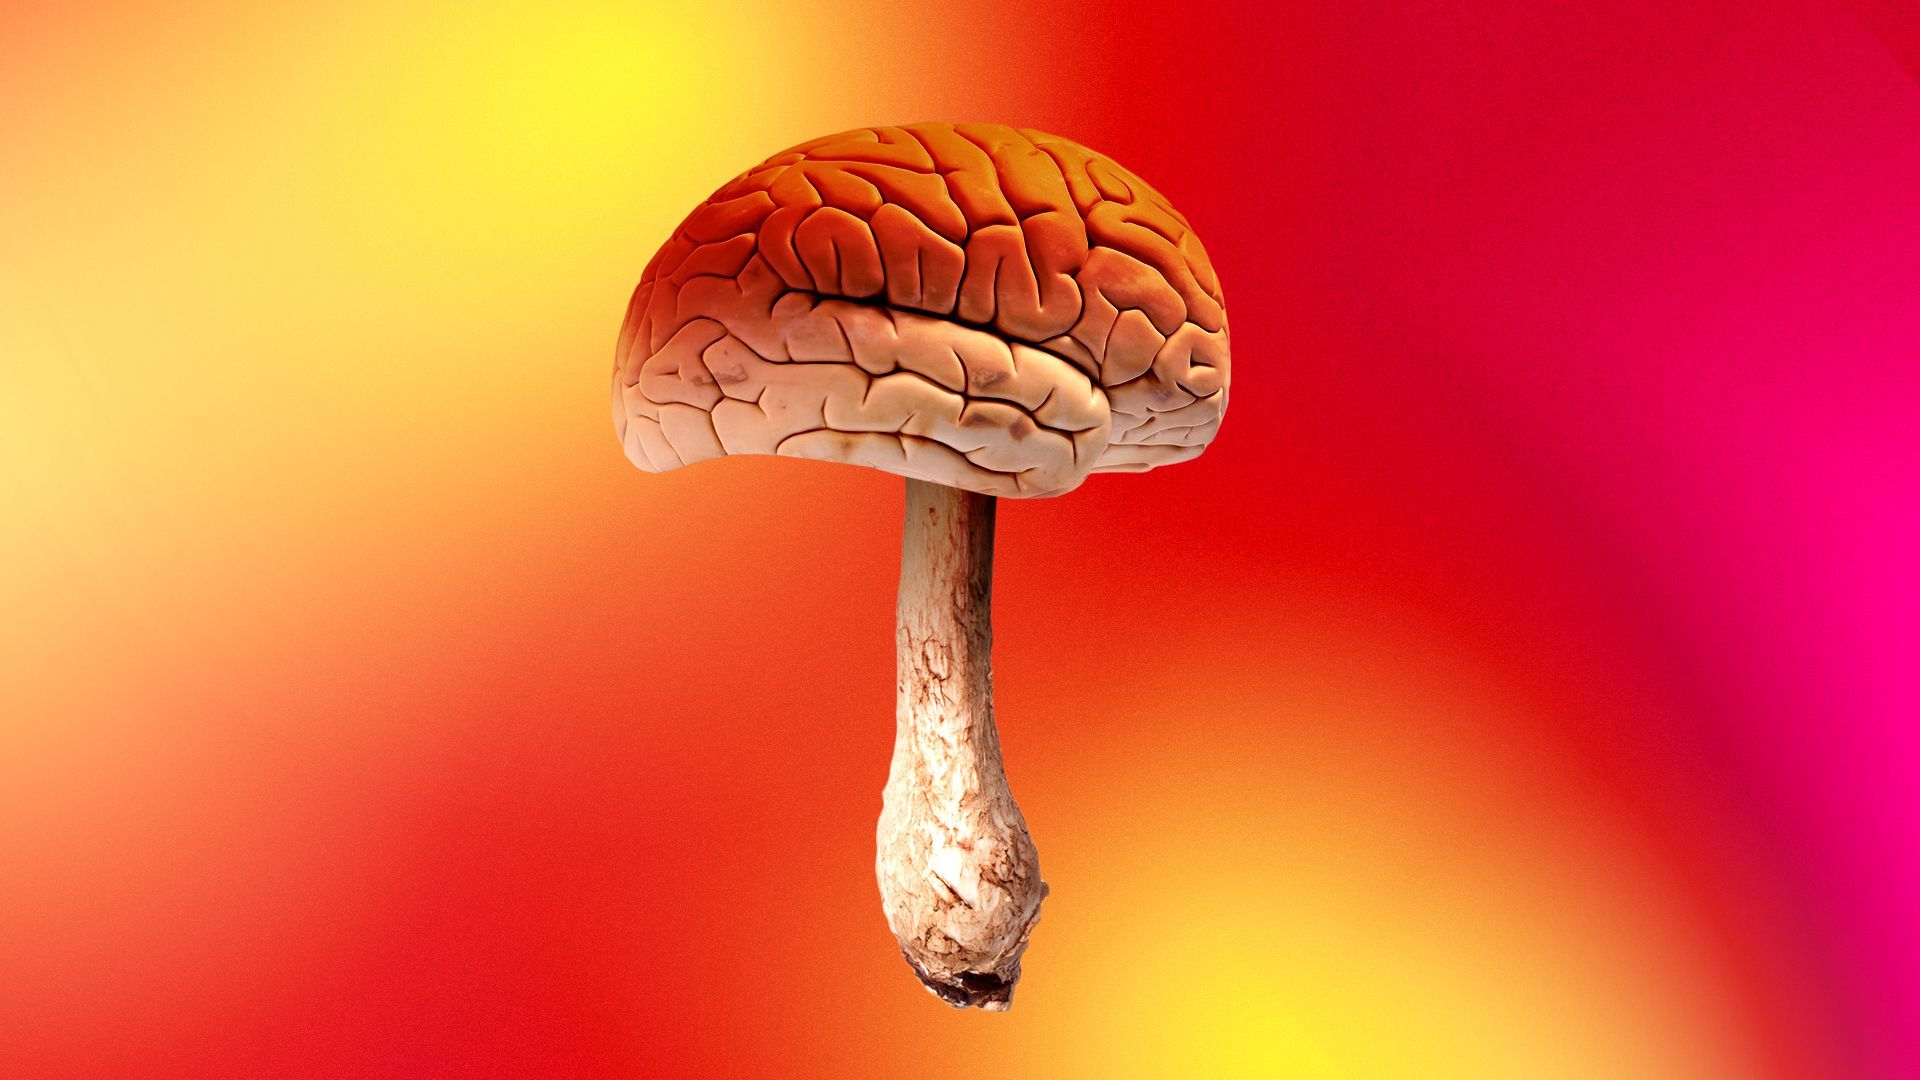 Illustration of a mushroom with the top made from a human brain